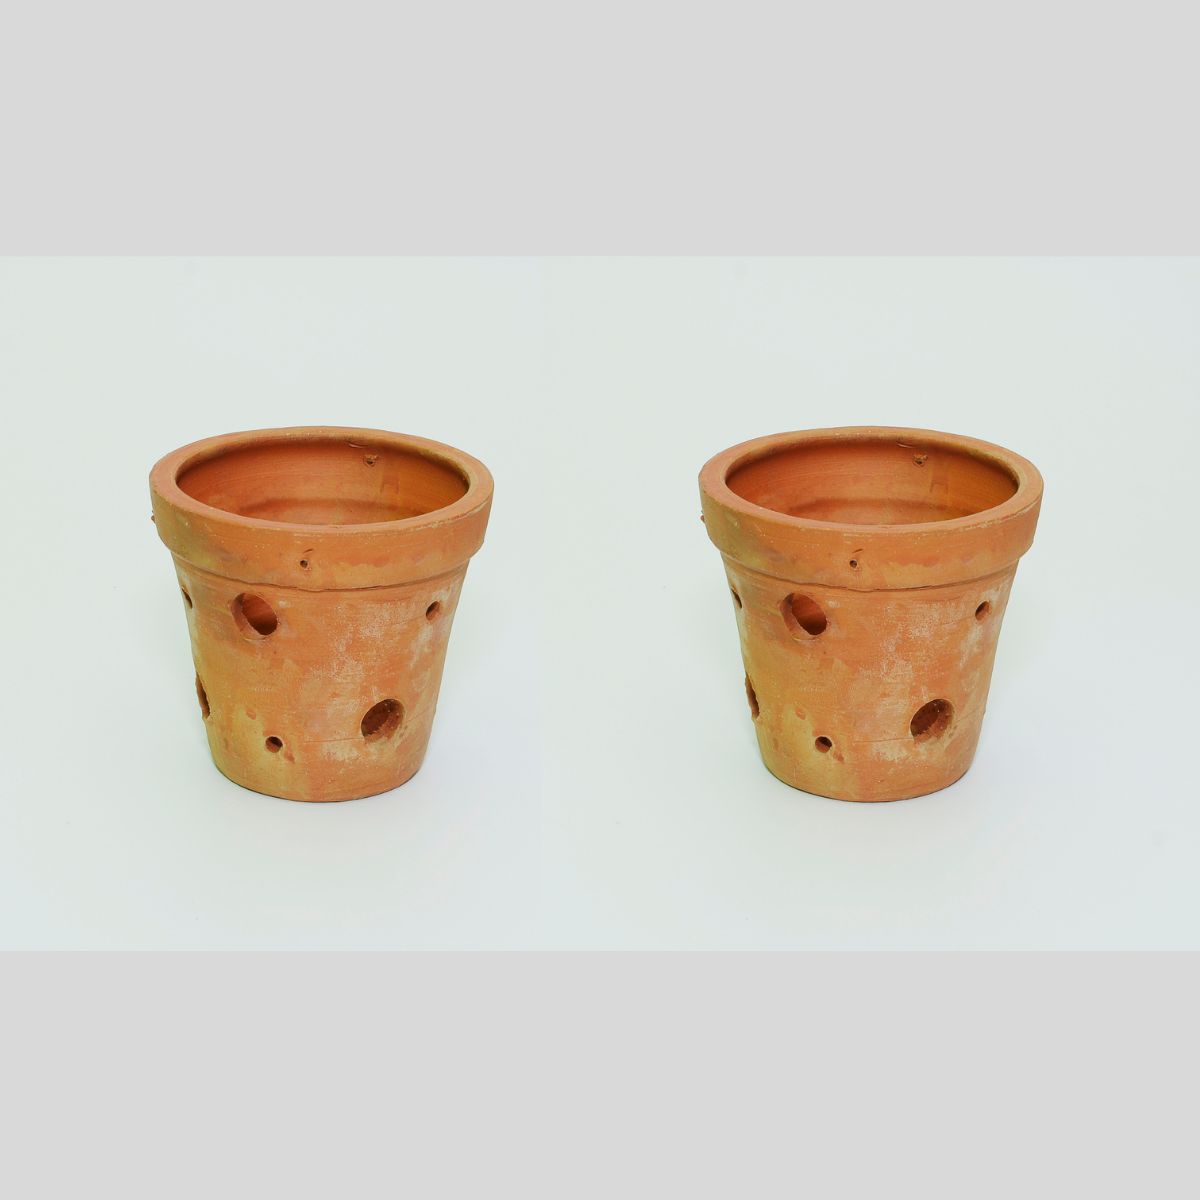 Terracotta Clay Cone Pot with Plate: Traditional elegance for your plants in this beautiful terracotta clay pot and plate set